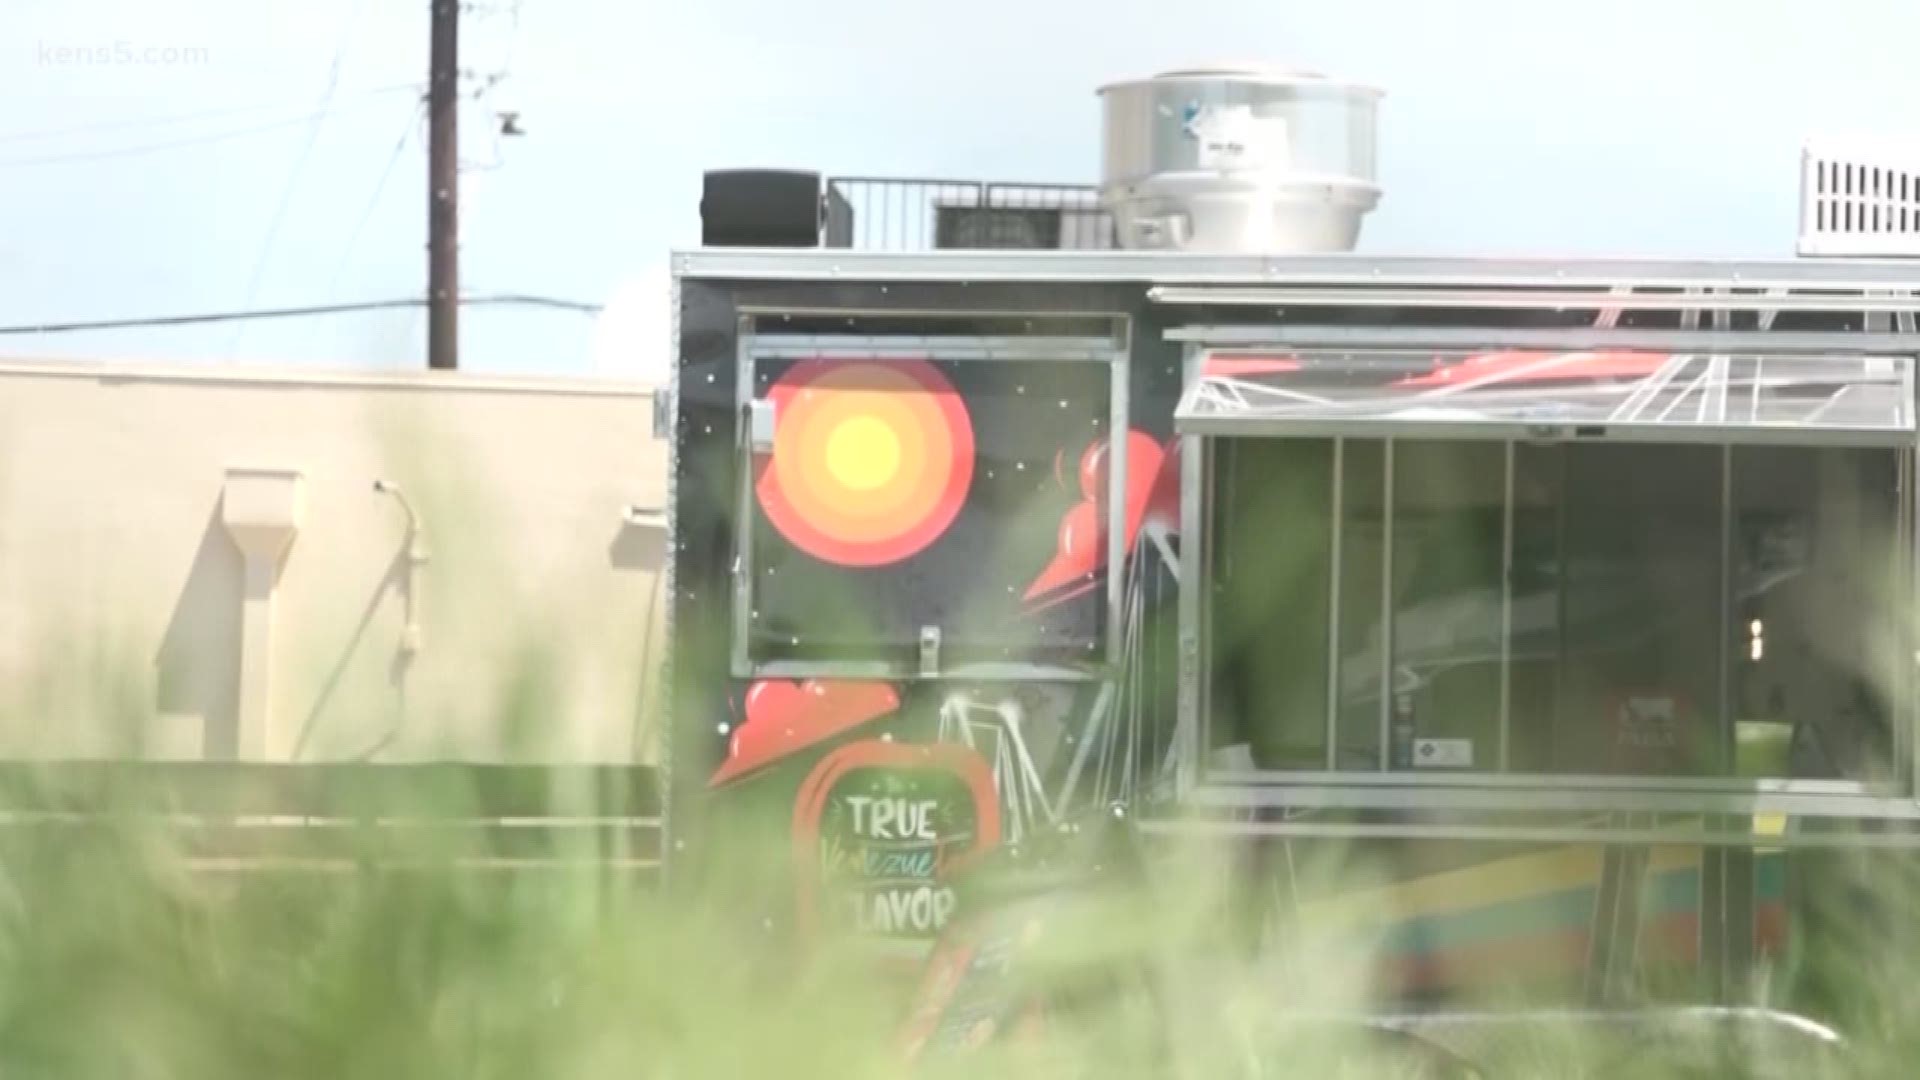 As temperatures continue to break the triple digits this week, one food truck owner says it feels like 132 degrees in his truck.